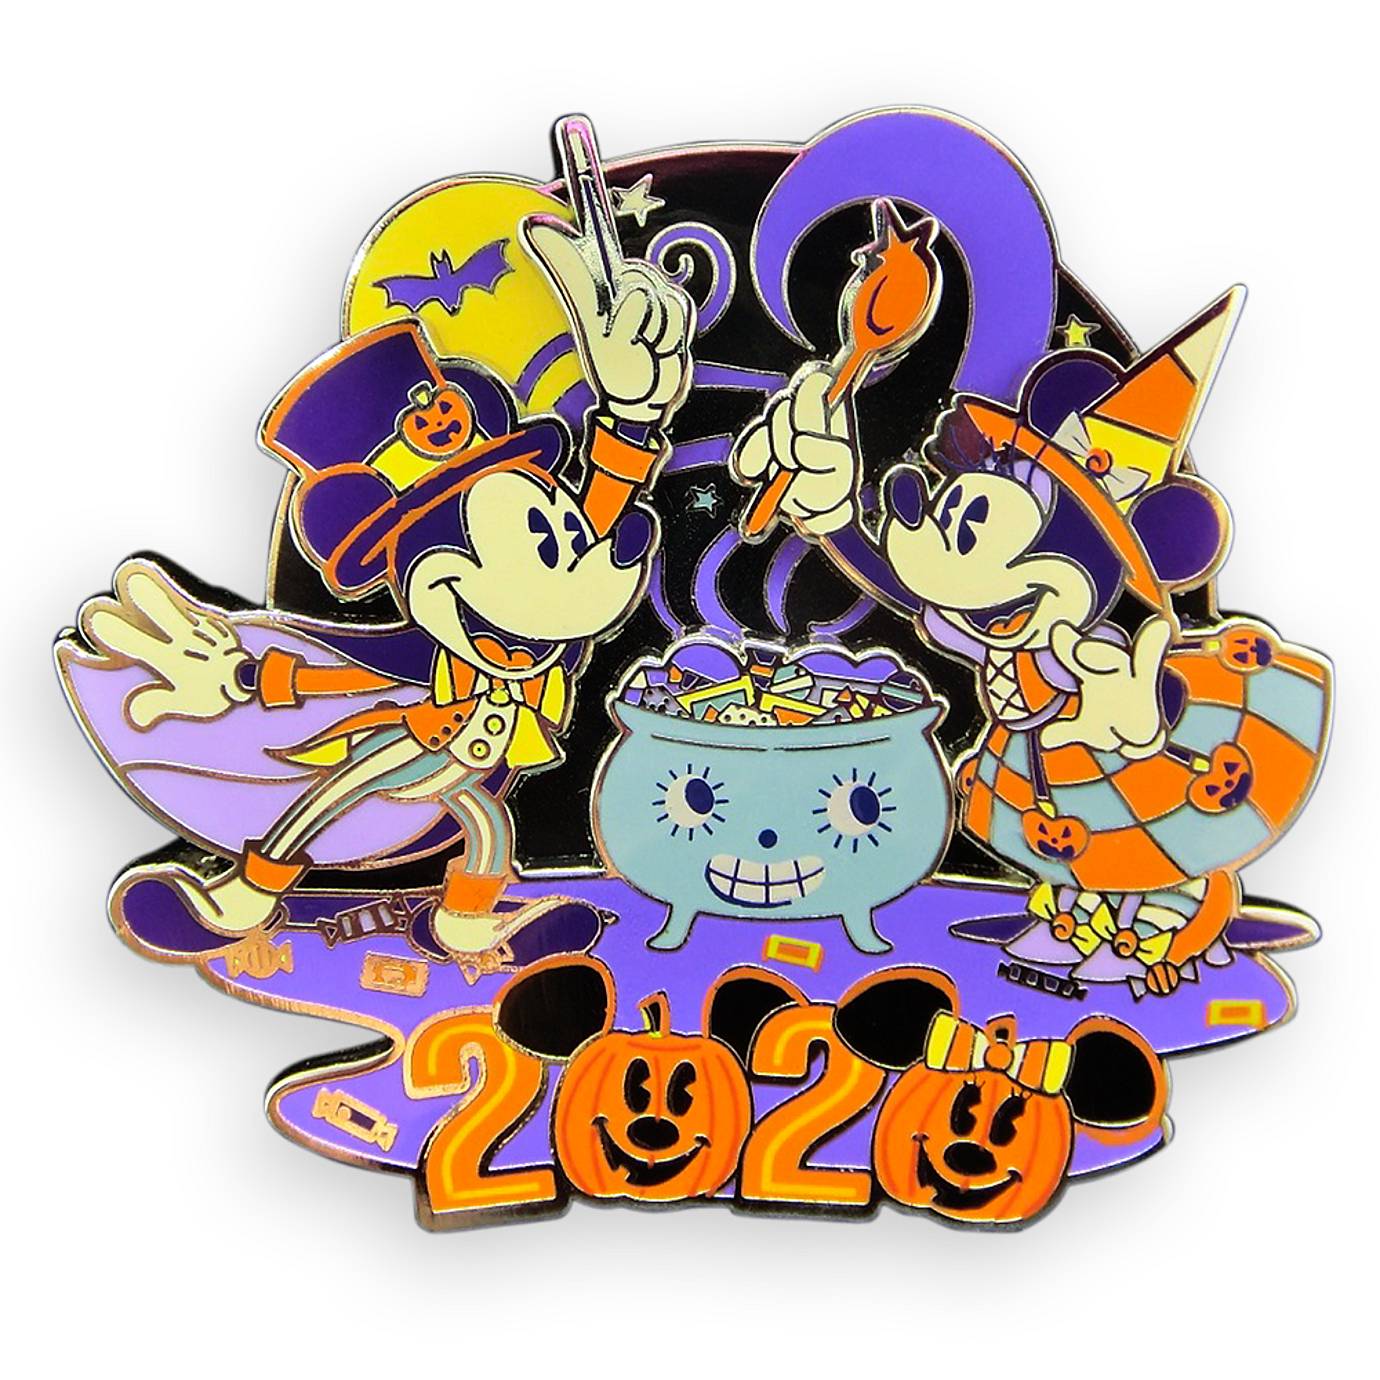 Disney Mickey Minnie Tricks and Treats Pin Halloween 2020 Limited New with Card